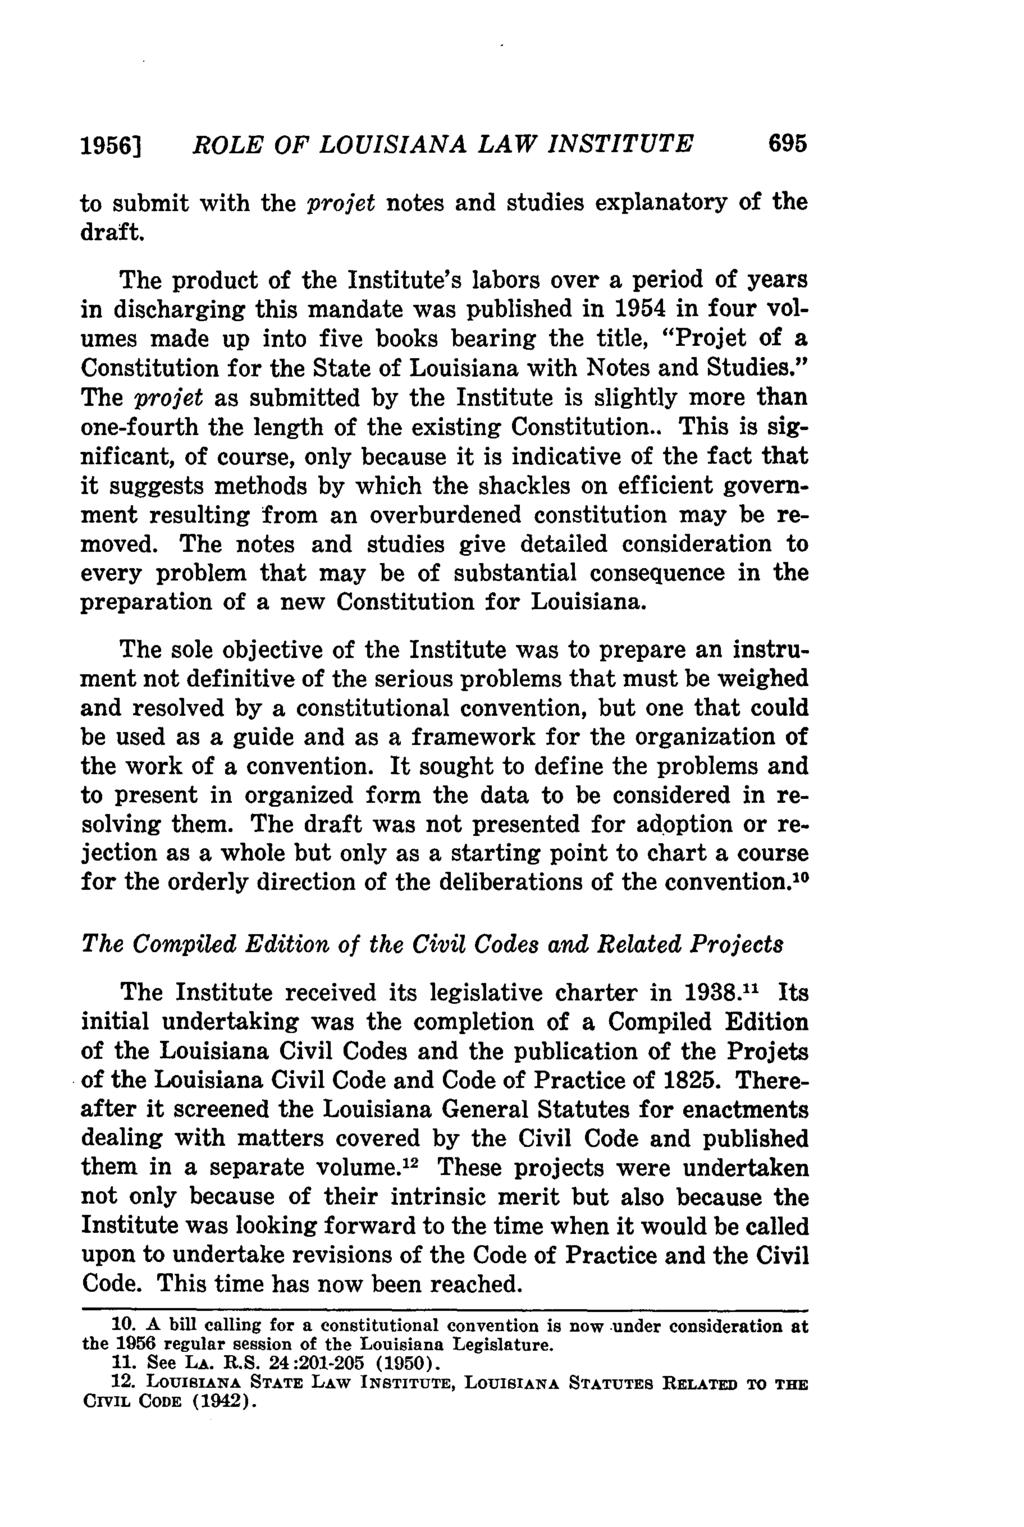 19561 ROLE OF LOUISIANA LAW INSTITUTE 695 to submit with the projet notes and studies explanatory of the draft.